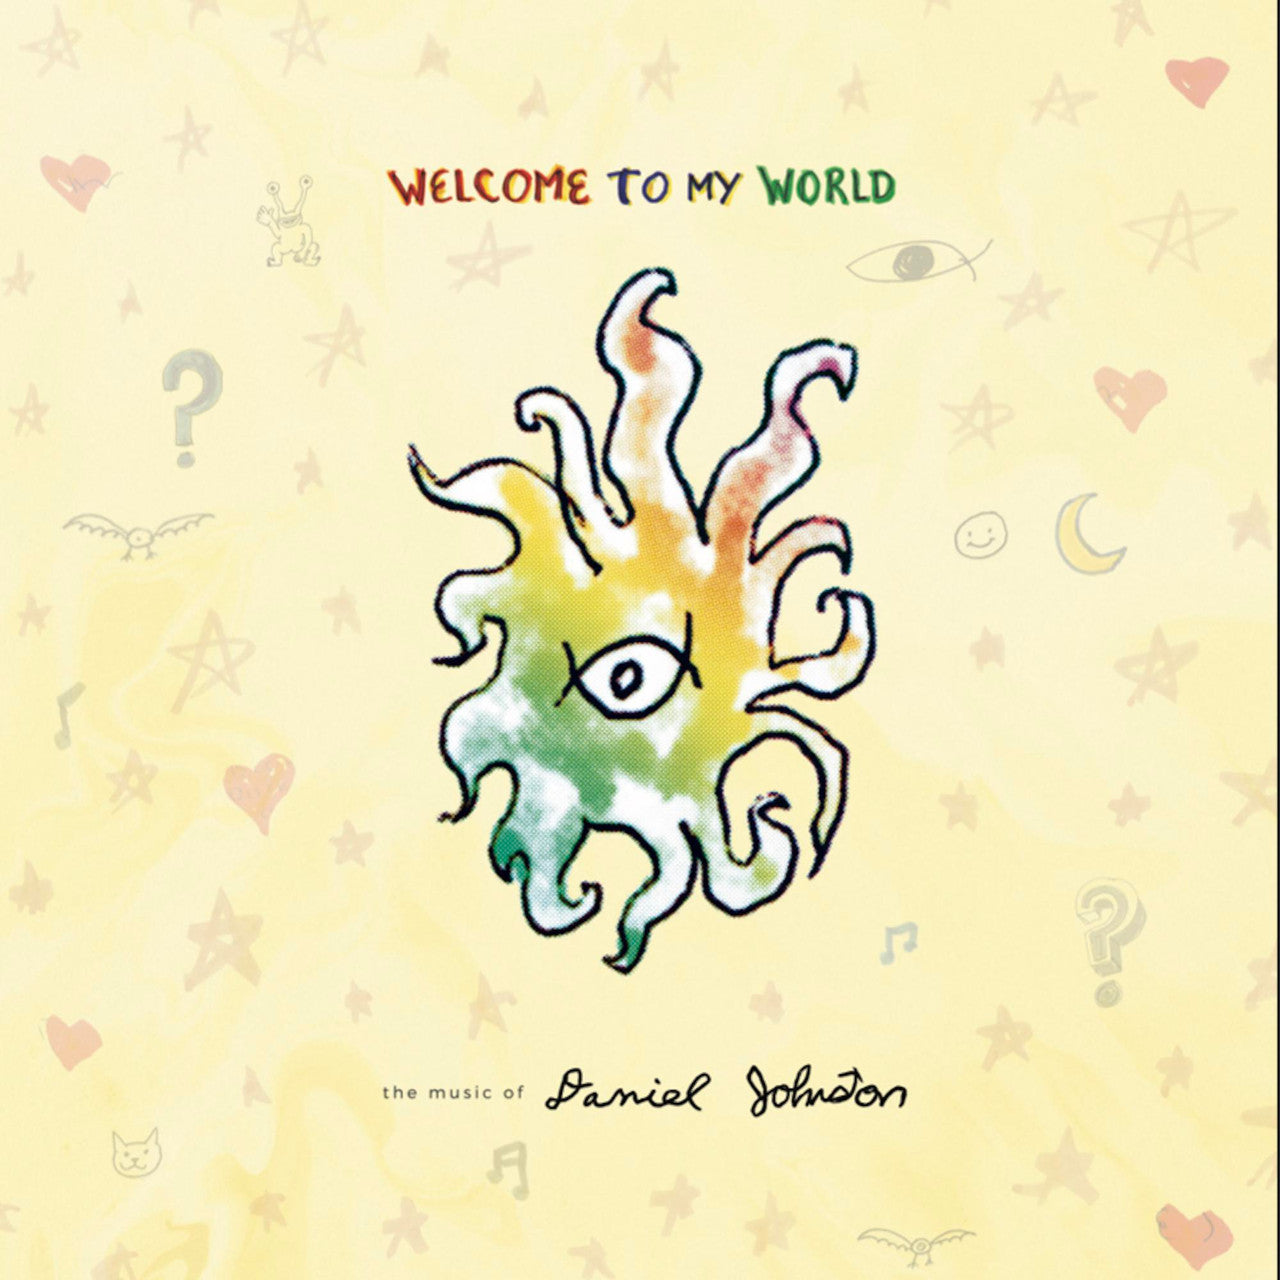 Daniel Johnston - Welcome To My World (Collector's Edition on Double Black Vinyl + 8-Page Book Inside)